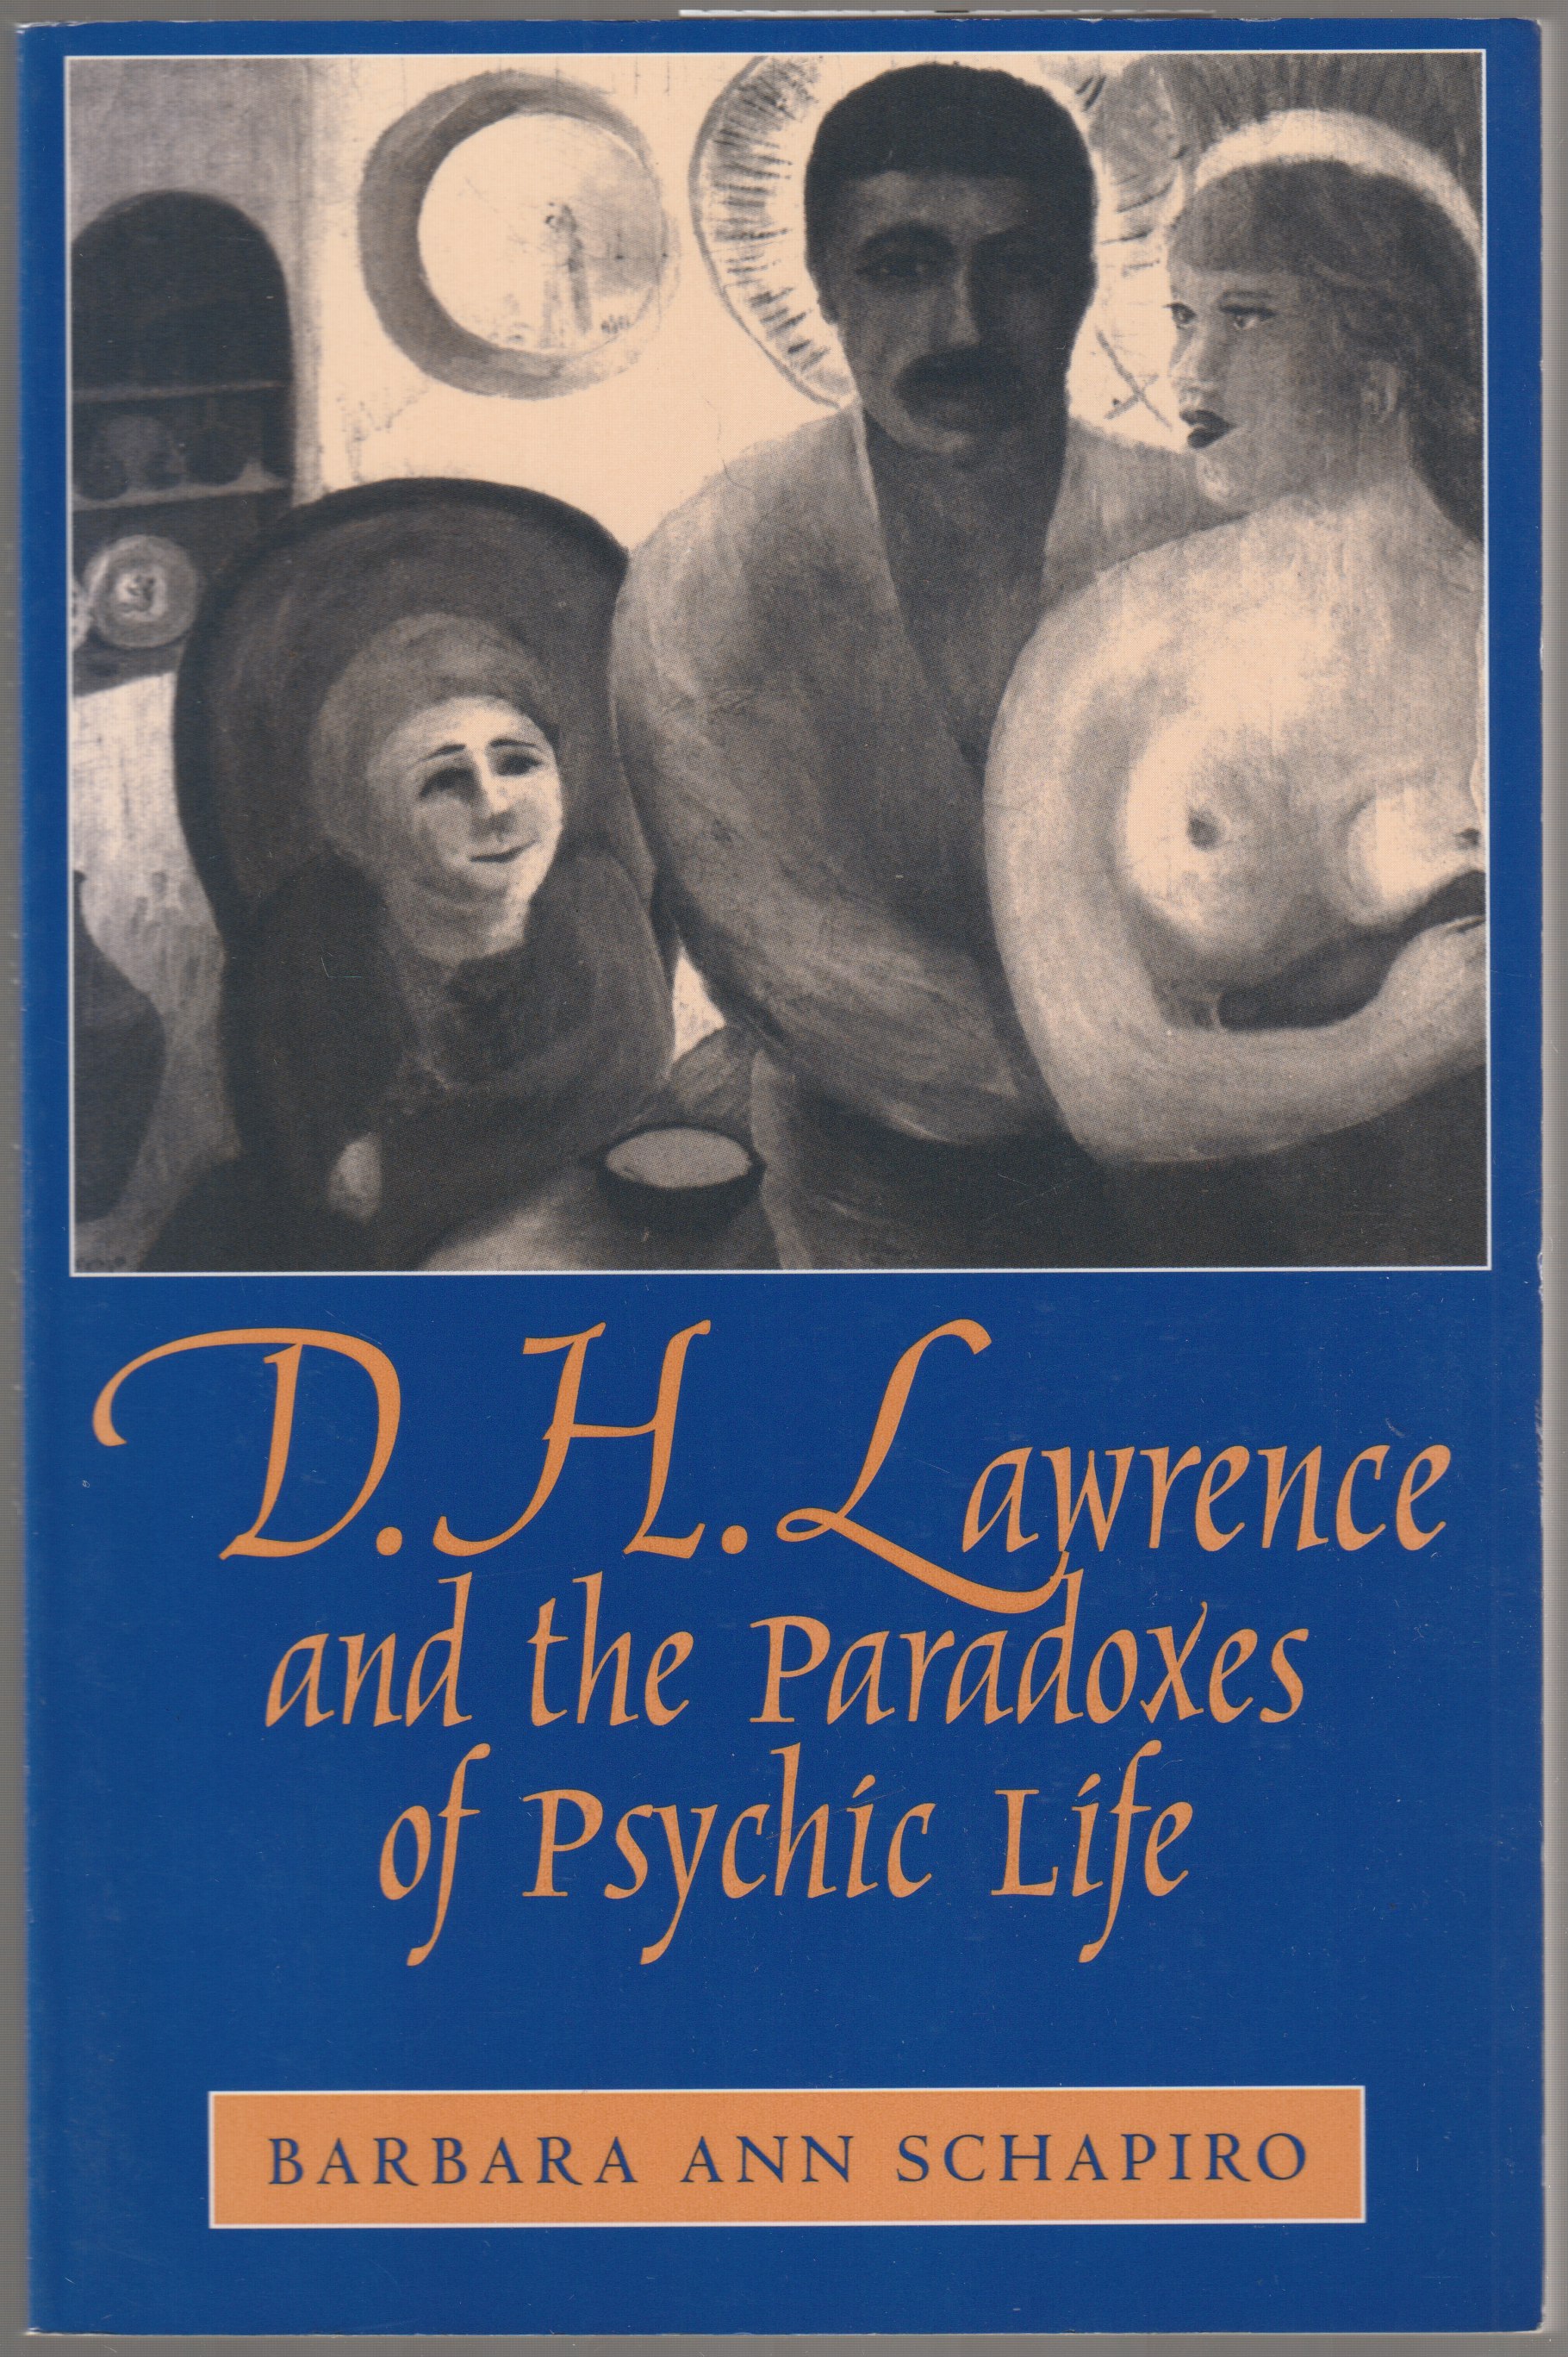 D.H. Lawrence and the paradoxes of psychic life